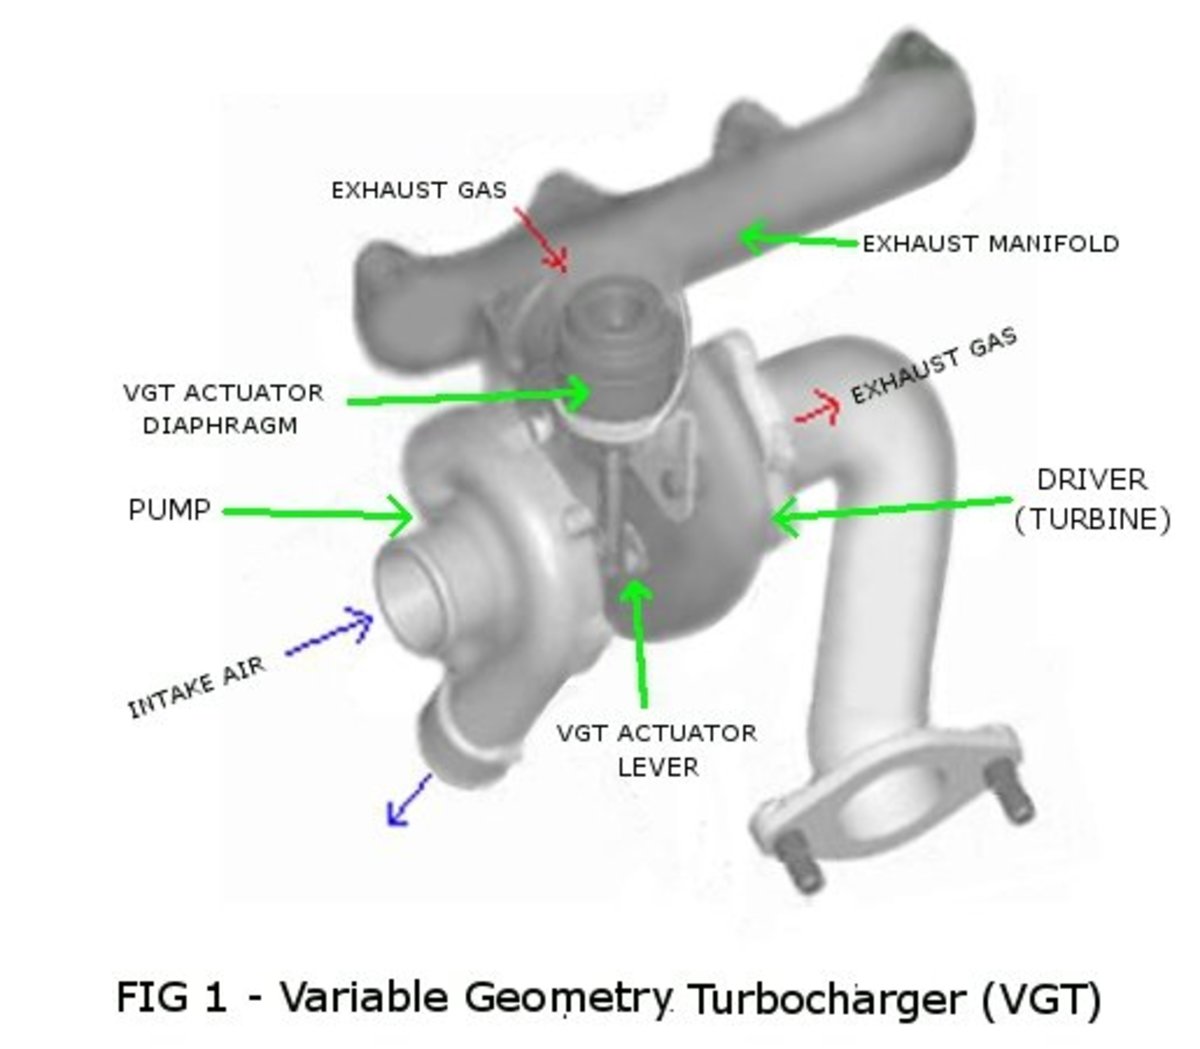 Turbocharged Diesel Engine Lacks Power Due to Stuck VGT Mechanism